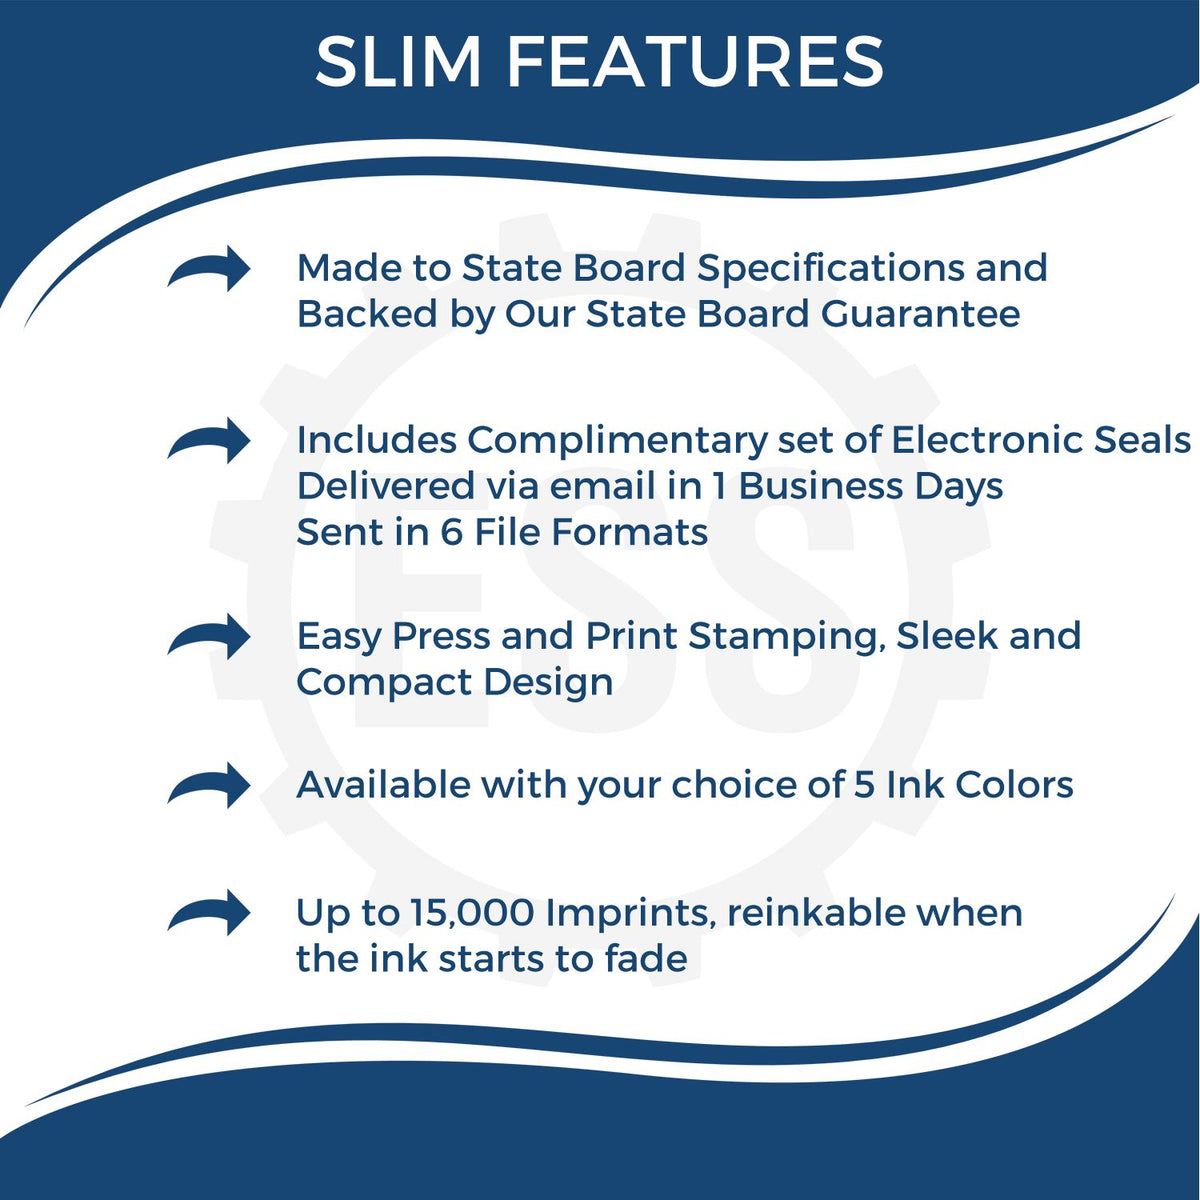 A picture of an infographic highlighting the selling points for the Slim Pre-Inked New York Professional Geologist Seal Stamp